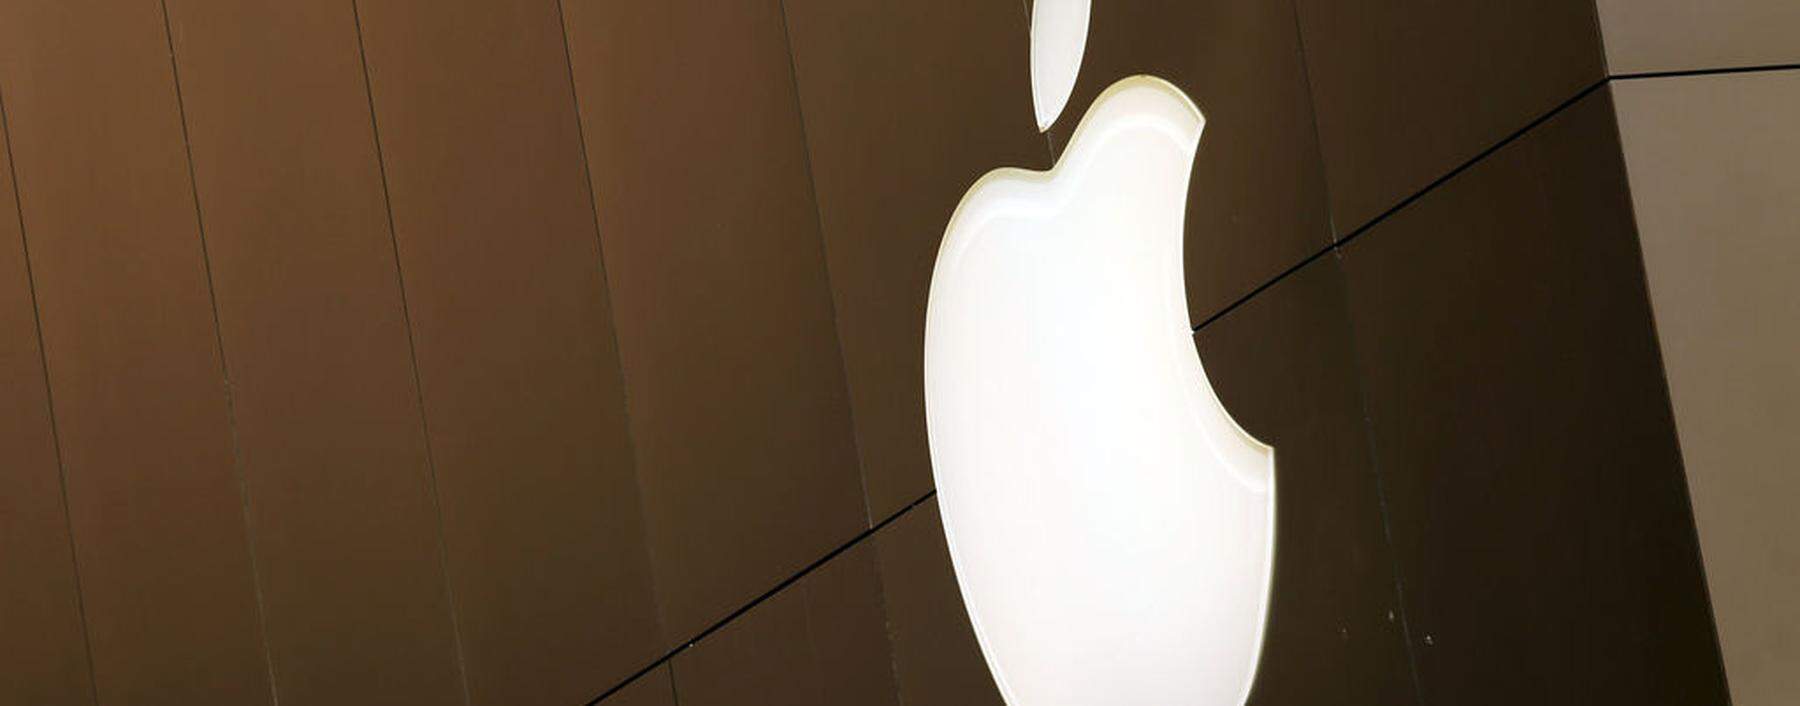 The Apple logo is seen at the flagship Apple retail store in San Francisco